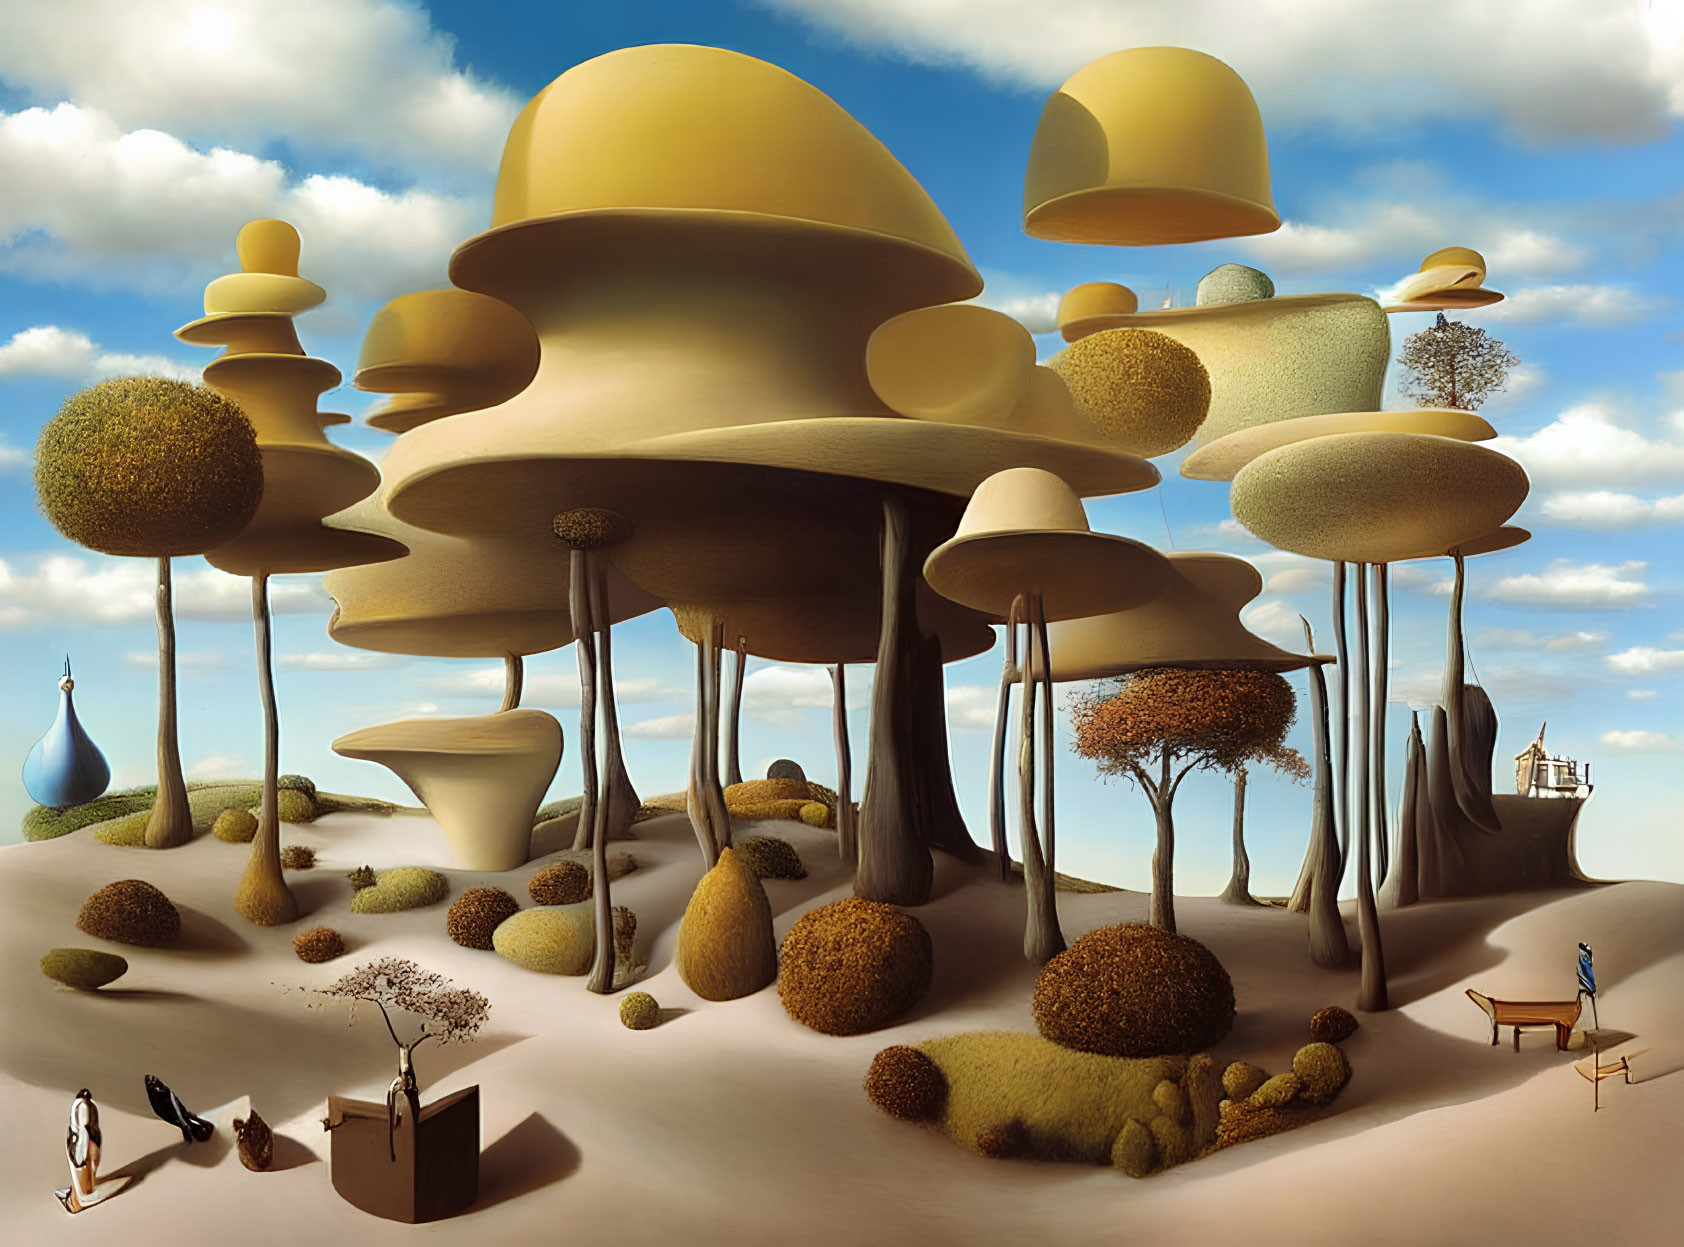 Surreal Landscape with Oversized Mushroom Trees and Tiny Human Figure